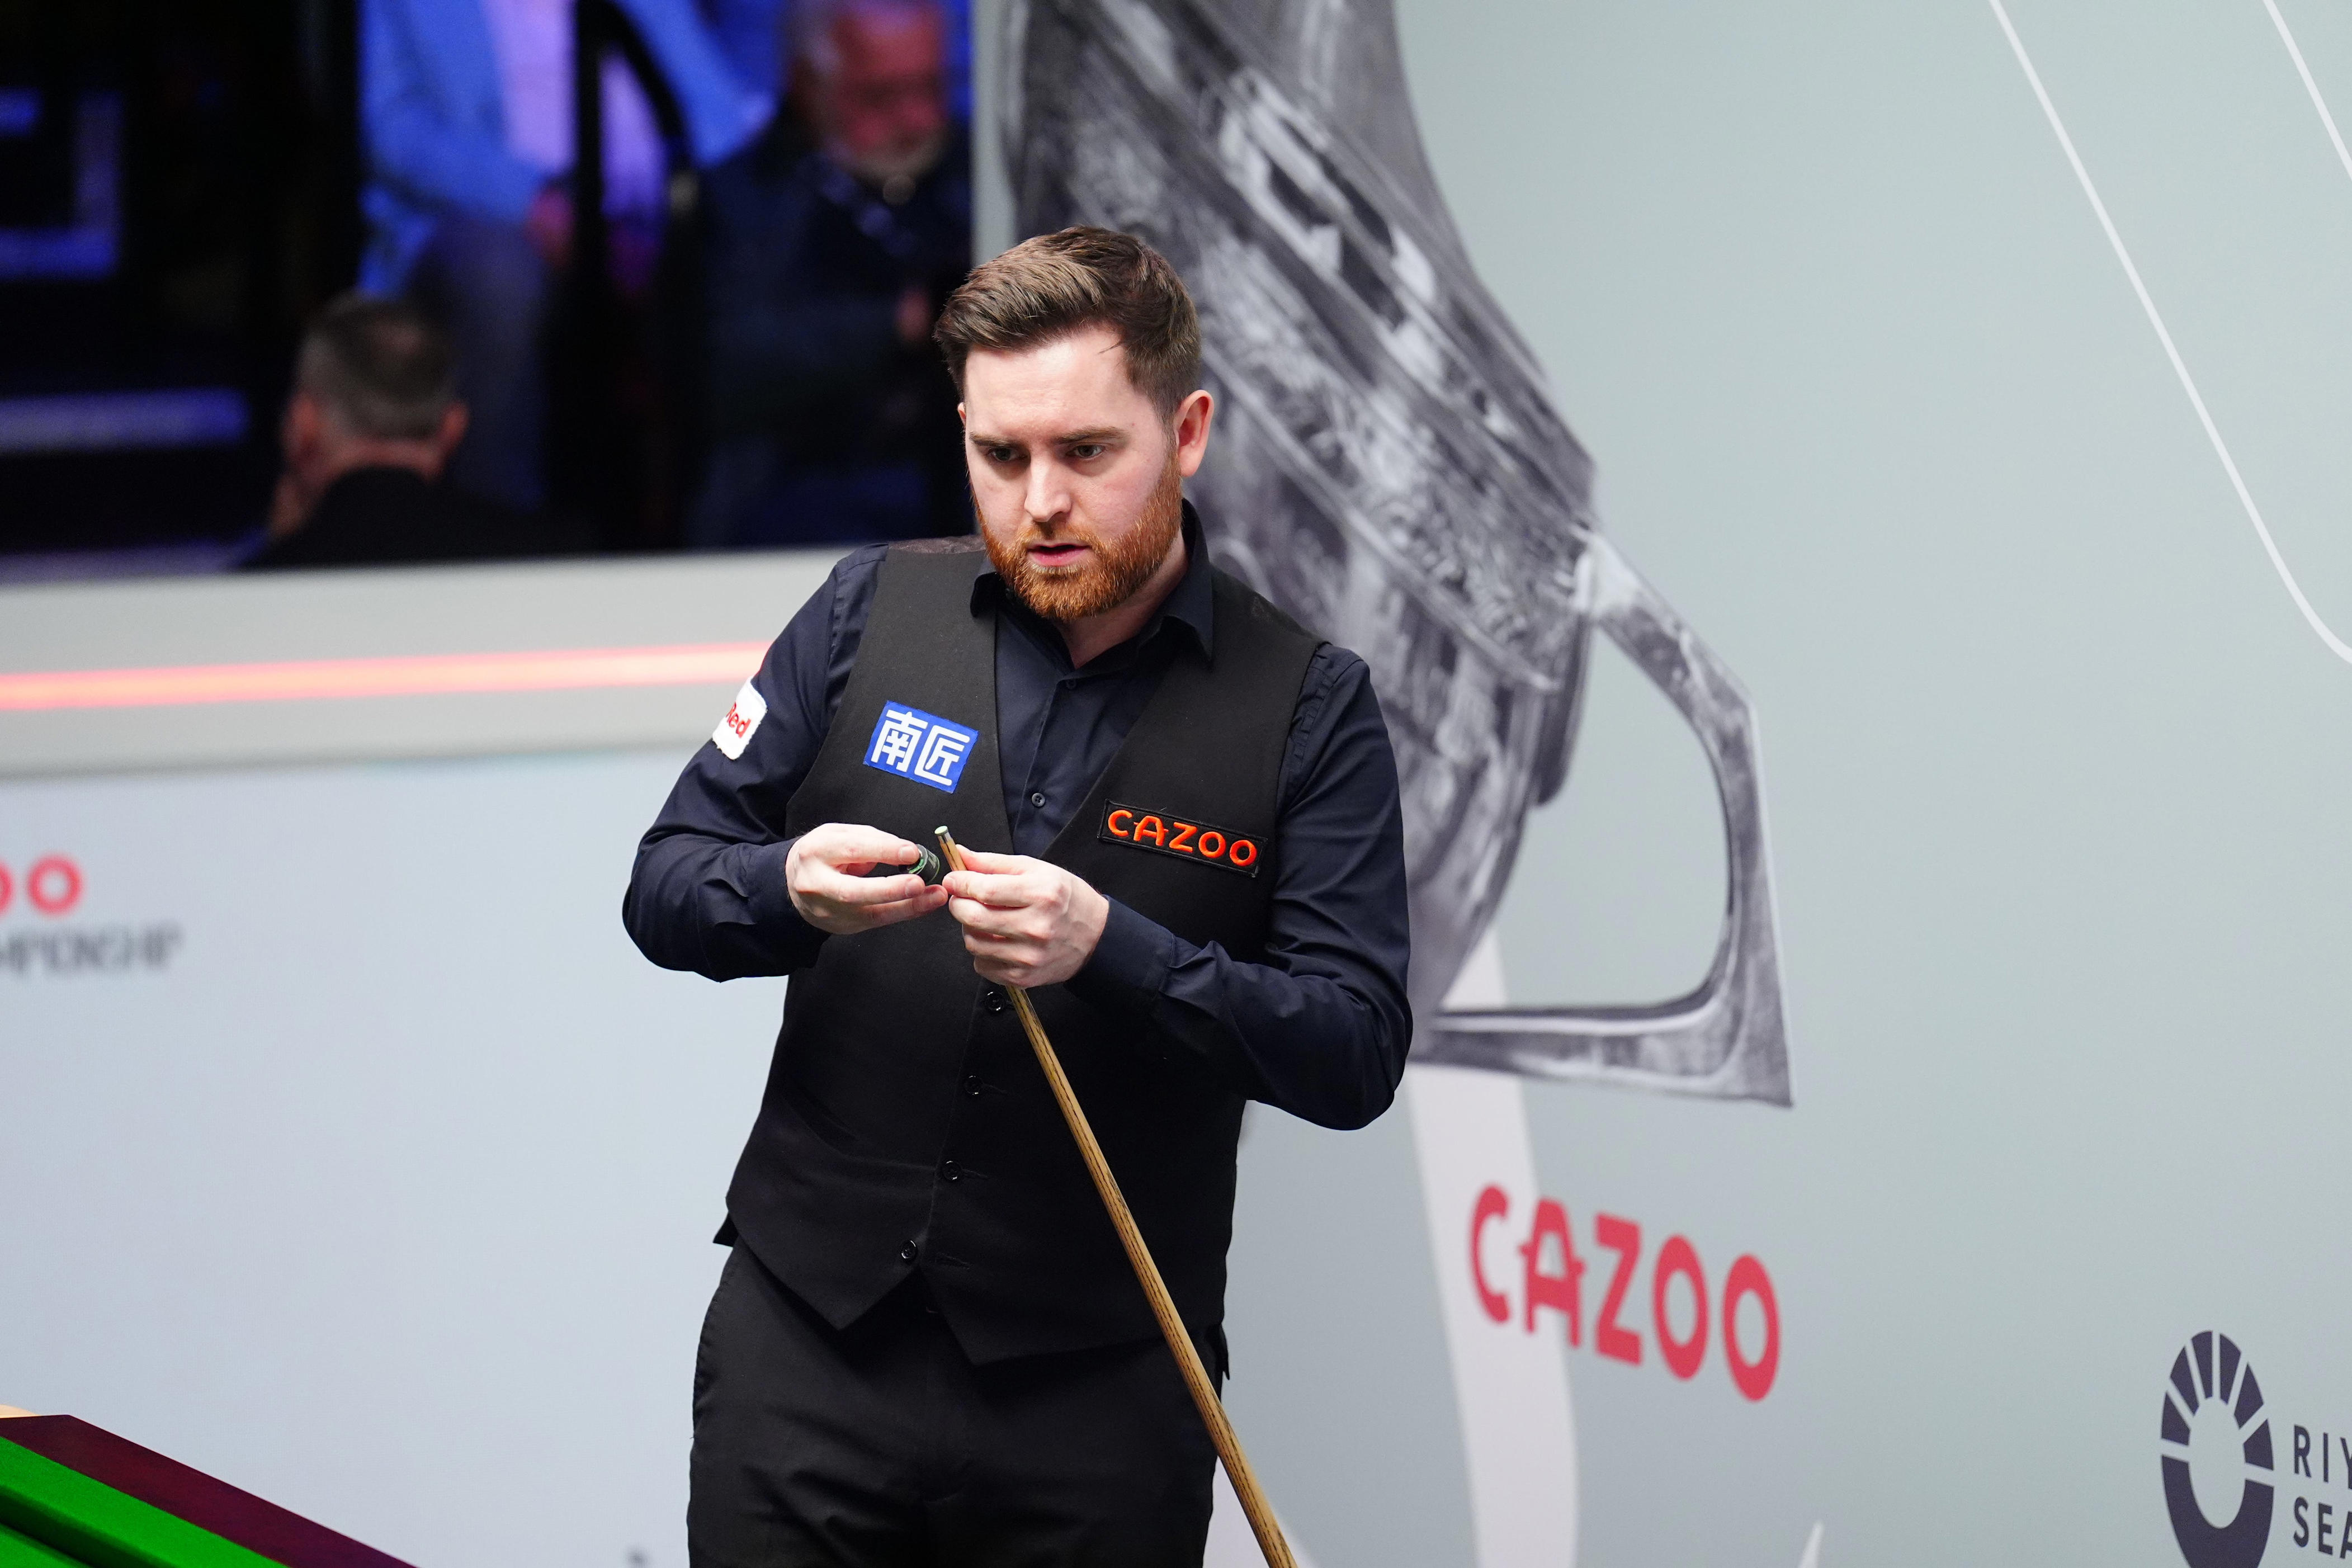 who is jak jones? the welsh qualifier making history at the world snooker championship